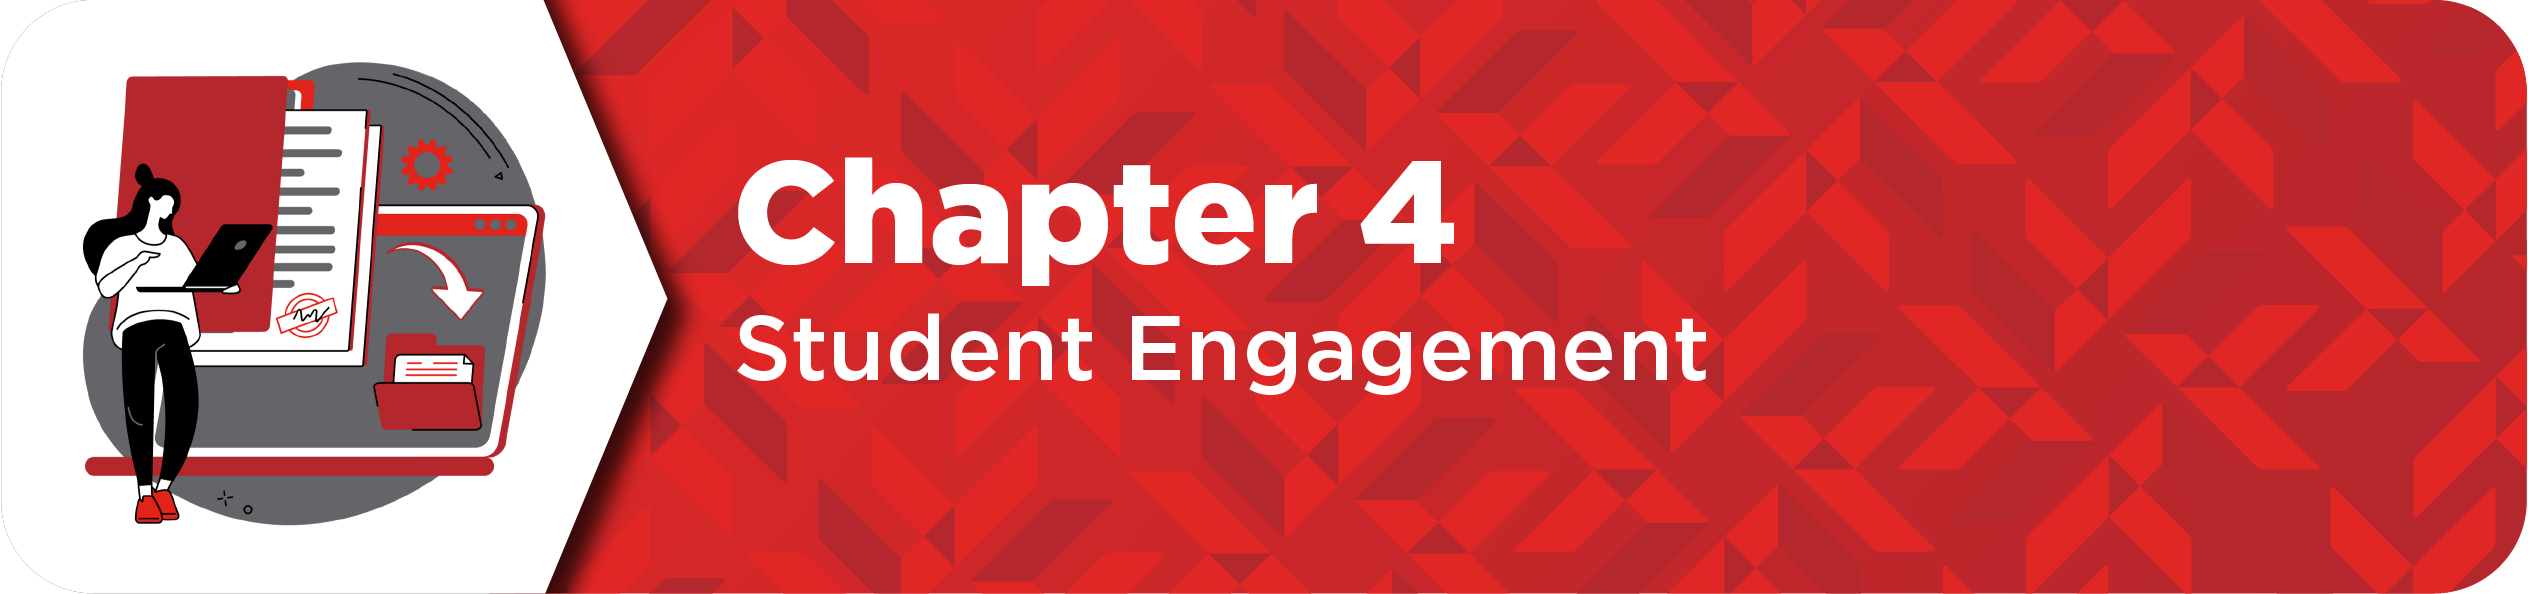 Chapter 4: Student Engangement